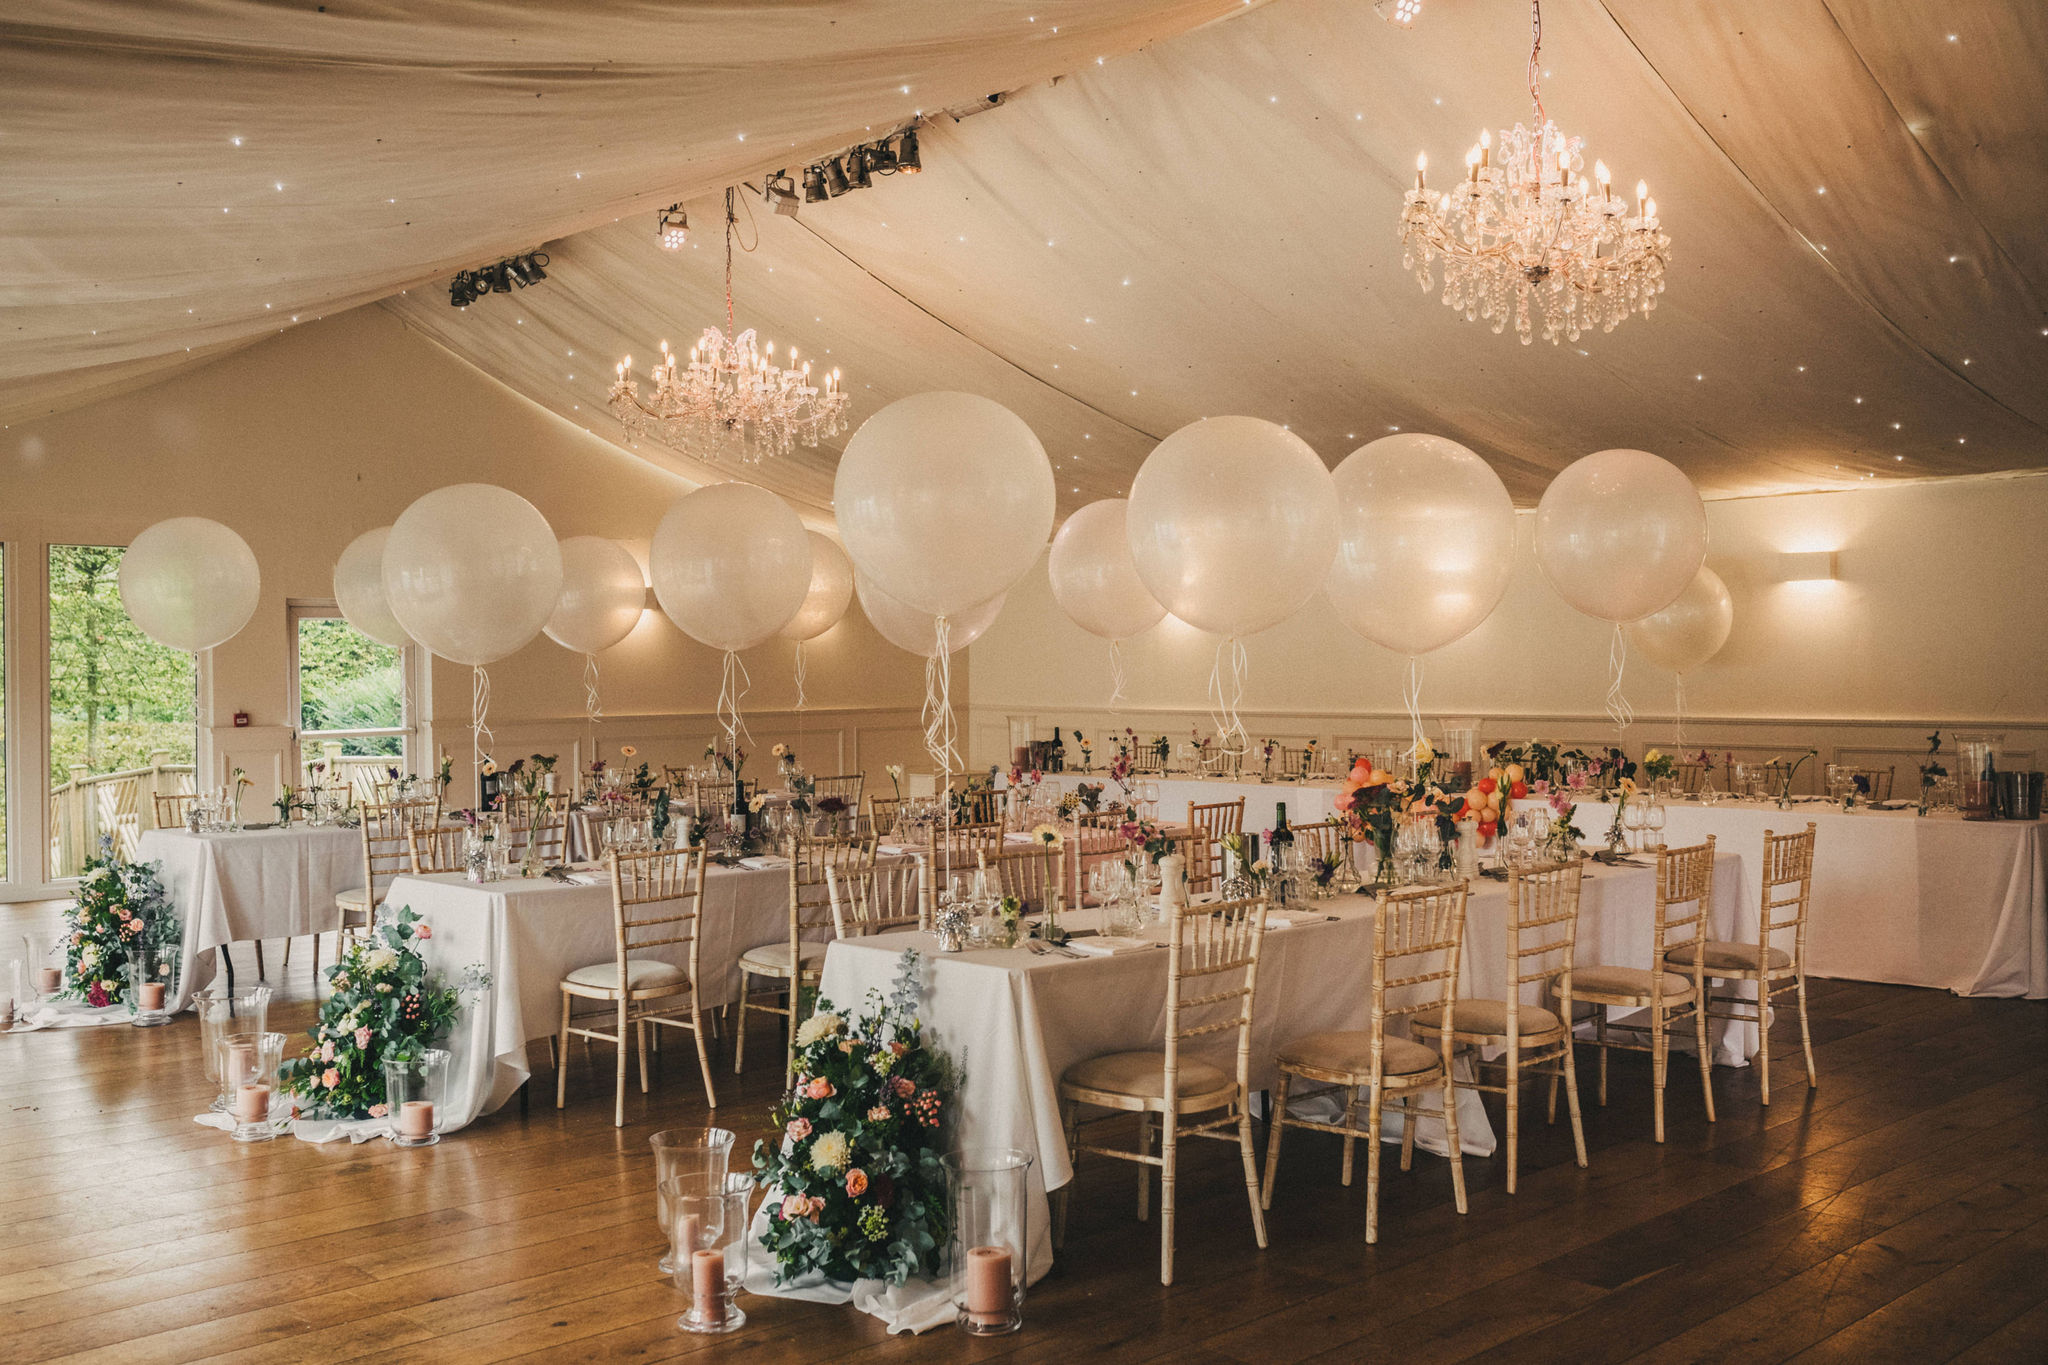 A marquee set up for a country themed wedding with trestle tables covered in white tablecloths and multiple flower arrangements with large white balloons tied to the back of the chairs